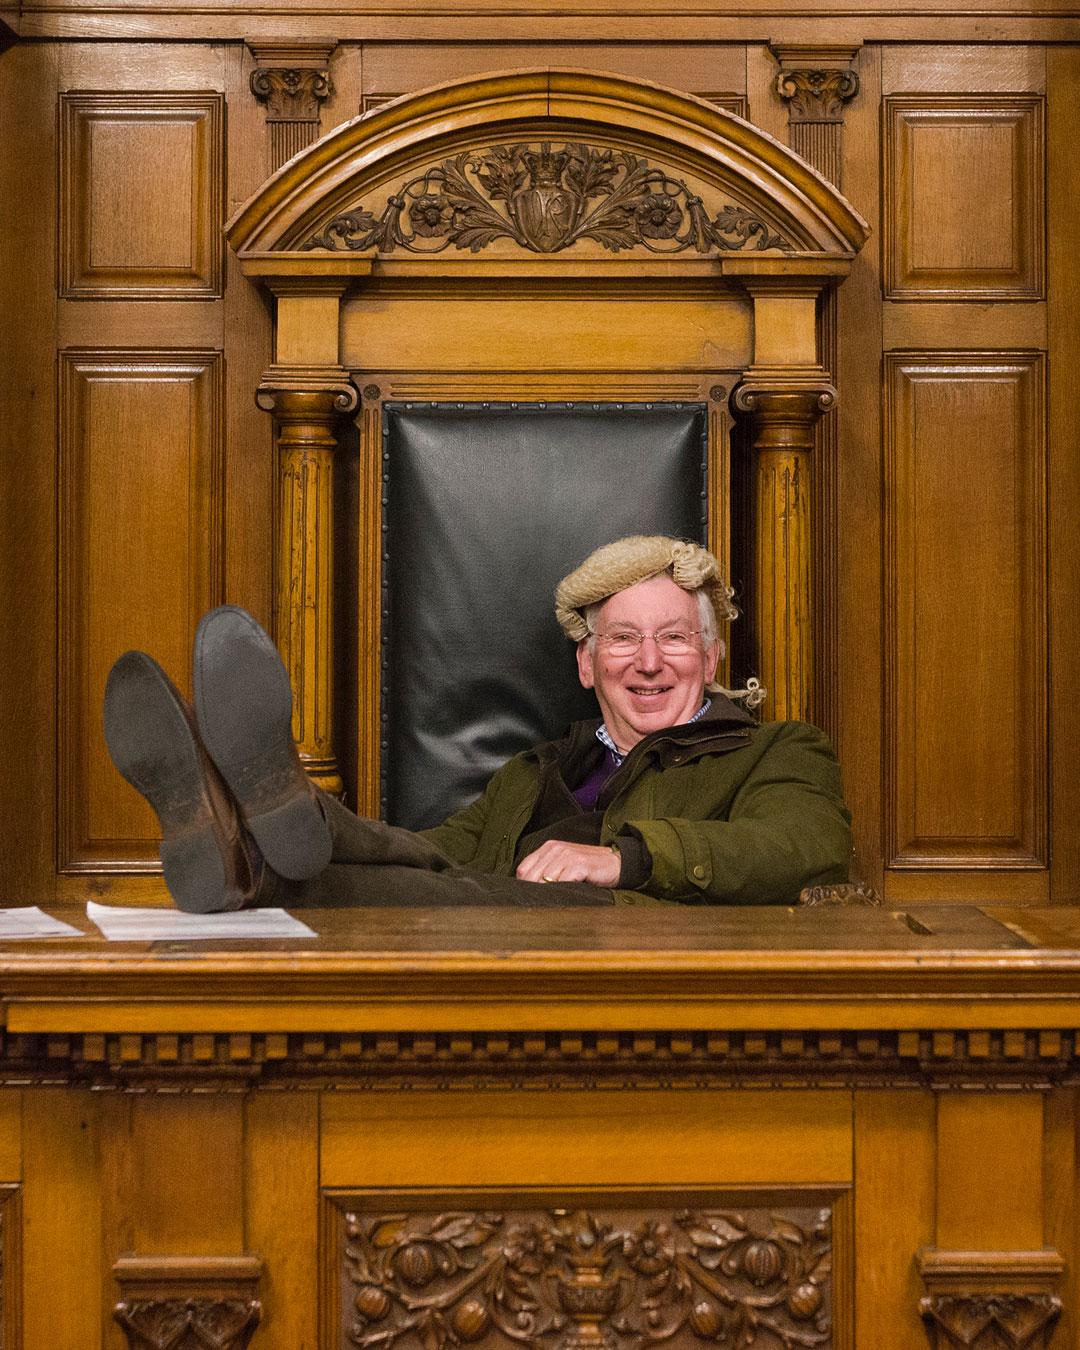 His Honour Andrew Hamilton will be back in his familiar seat in the historic courtroom